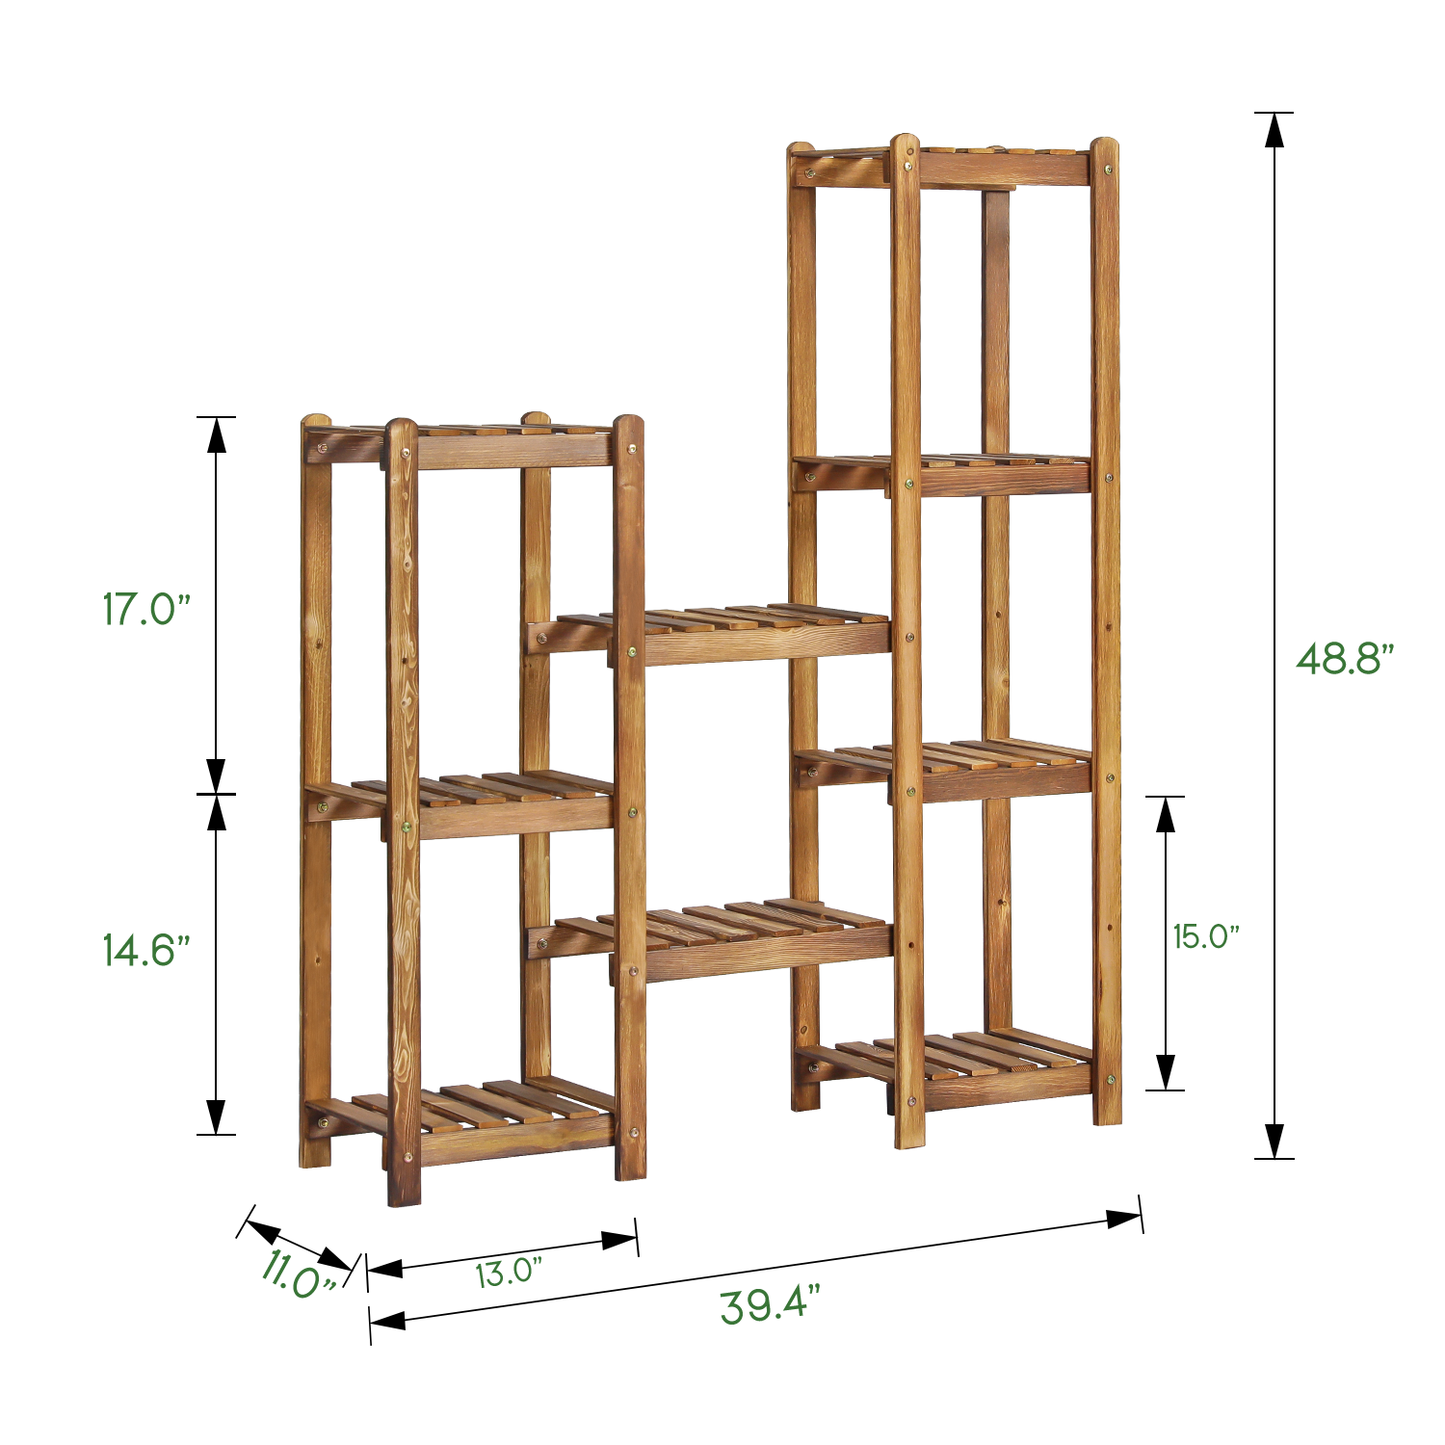 Flower Plant Stand Display Shelf Assembly - Carbonized